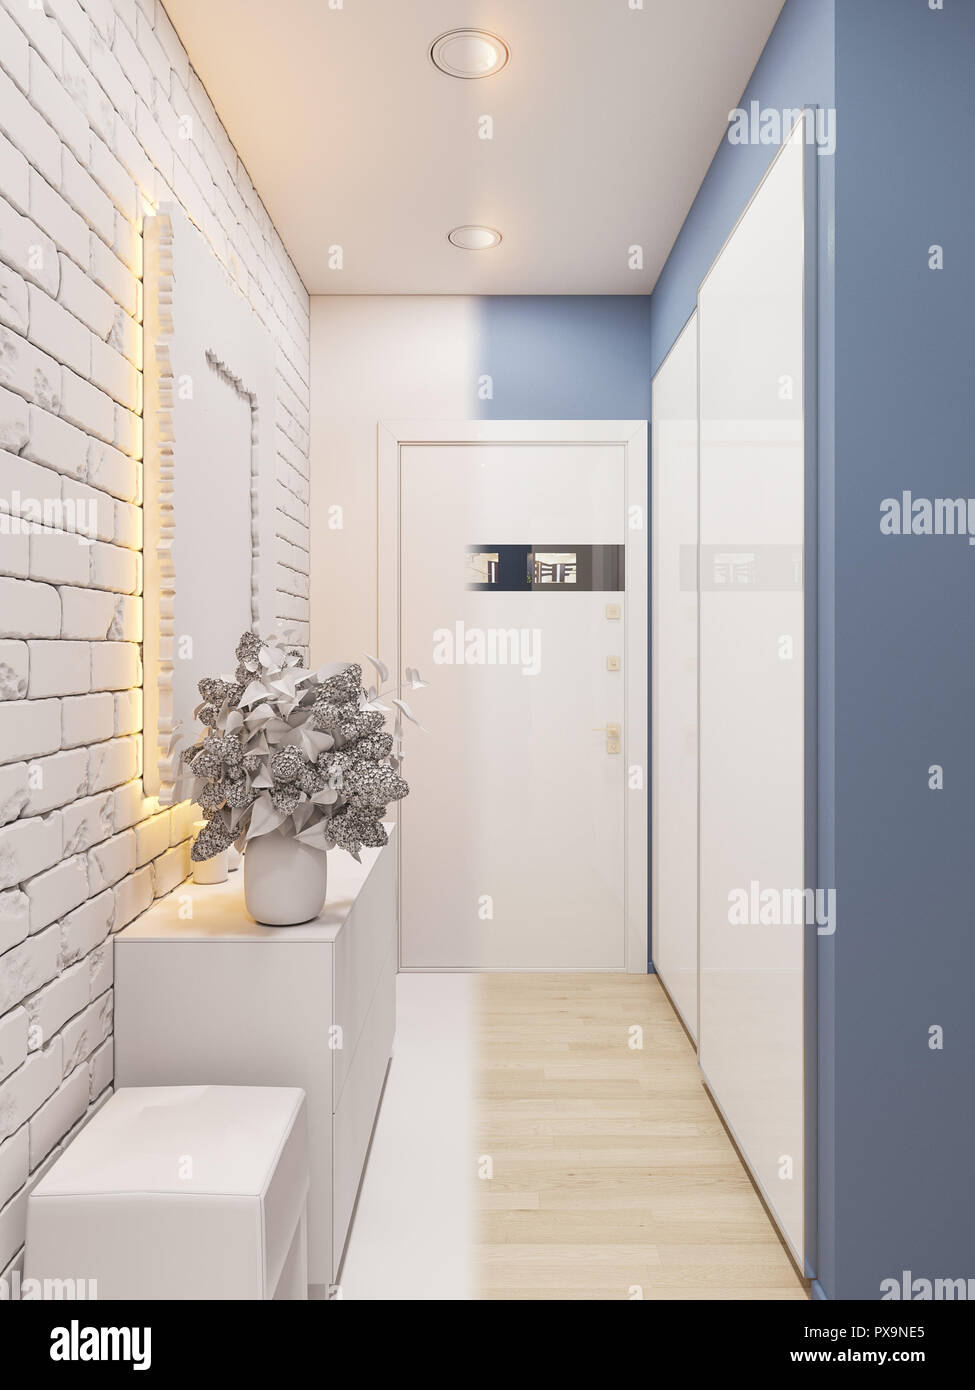 3d illustration of the interior design of an apartment in Scandinavian style. Architectural visualization of the interior hallway in white colors ambi Stock Photo